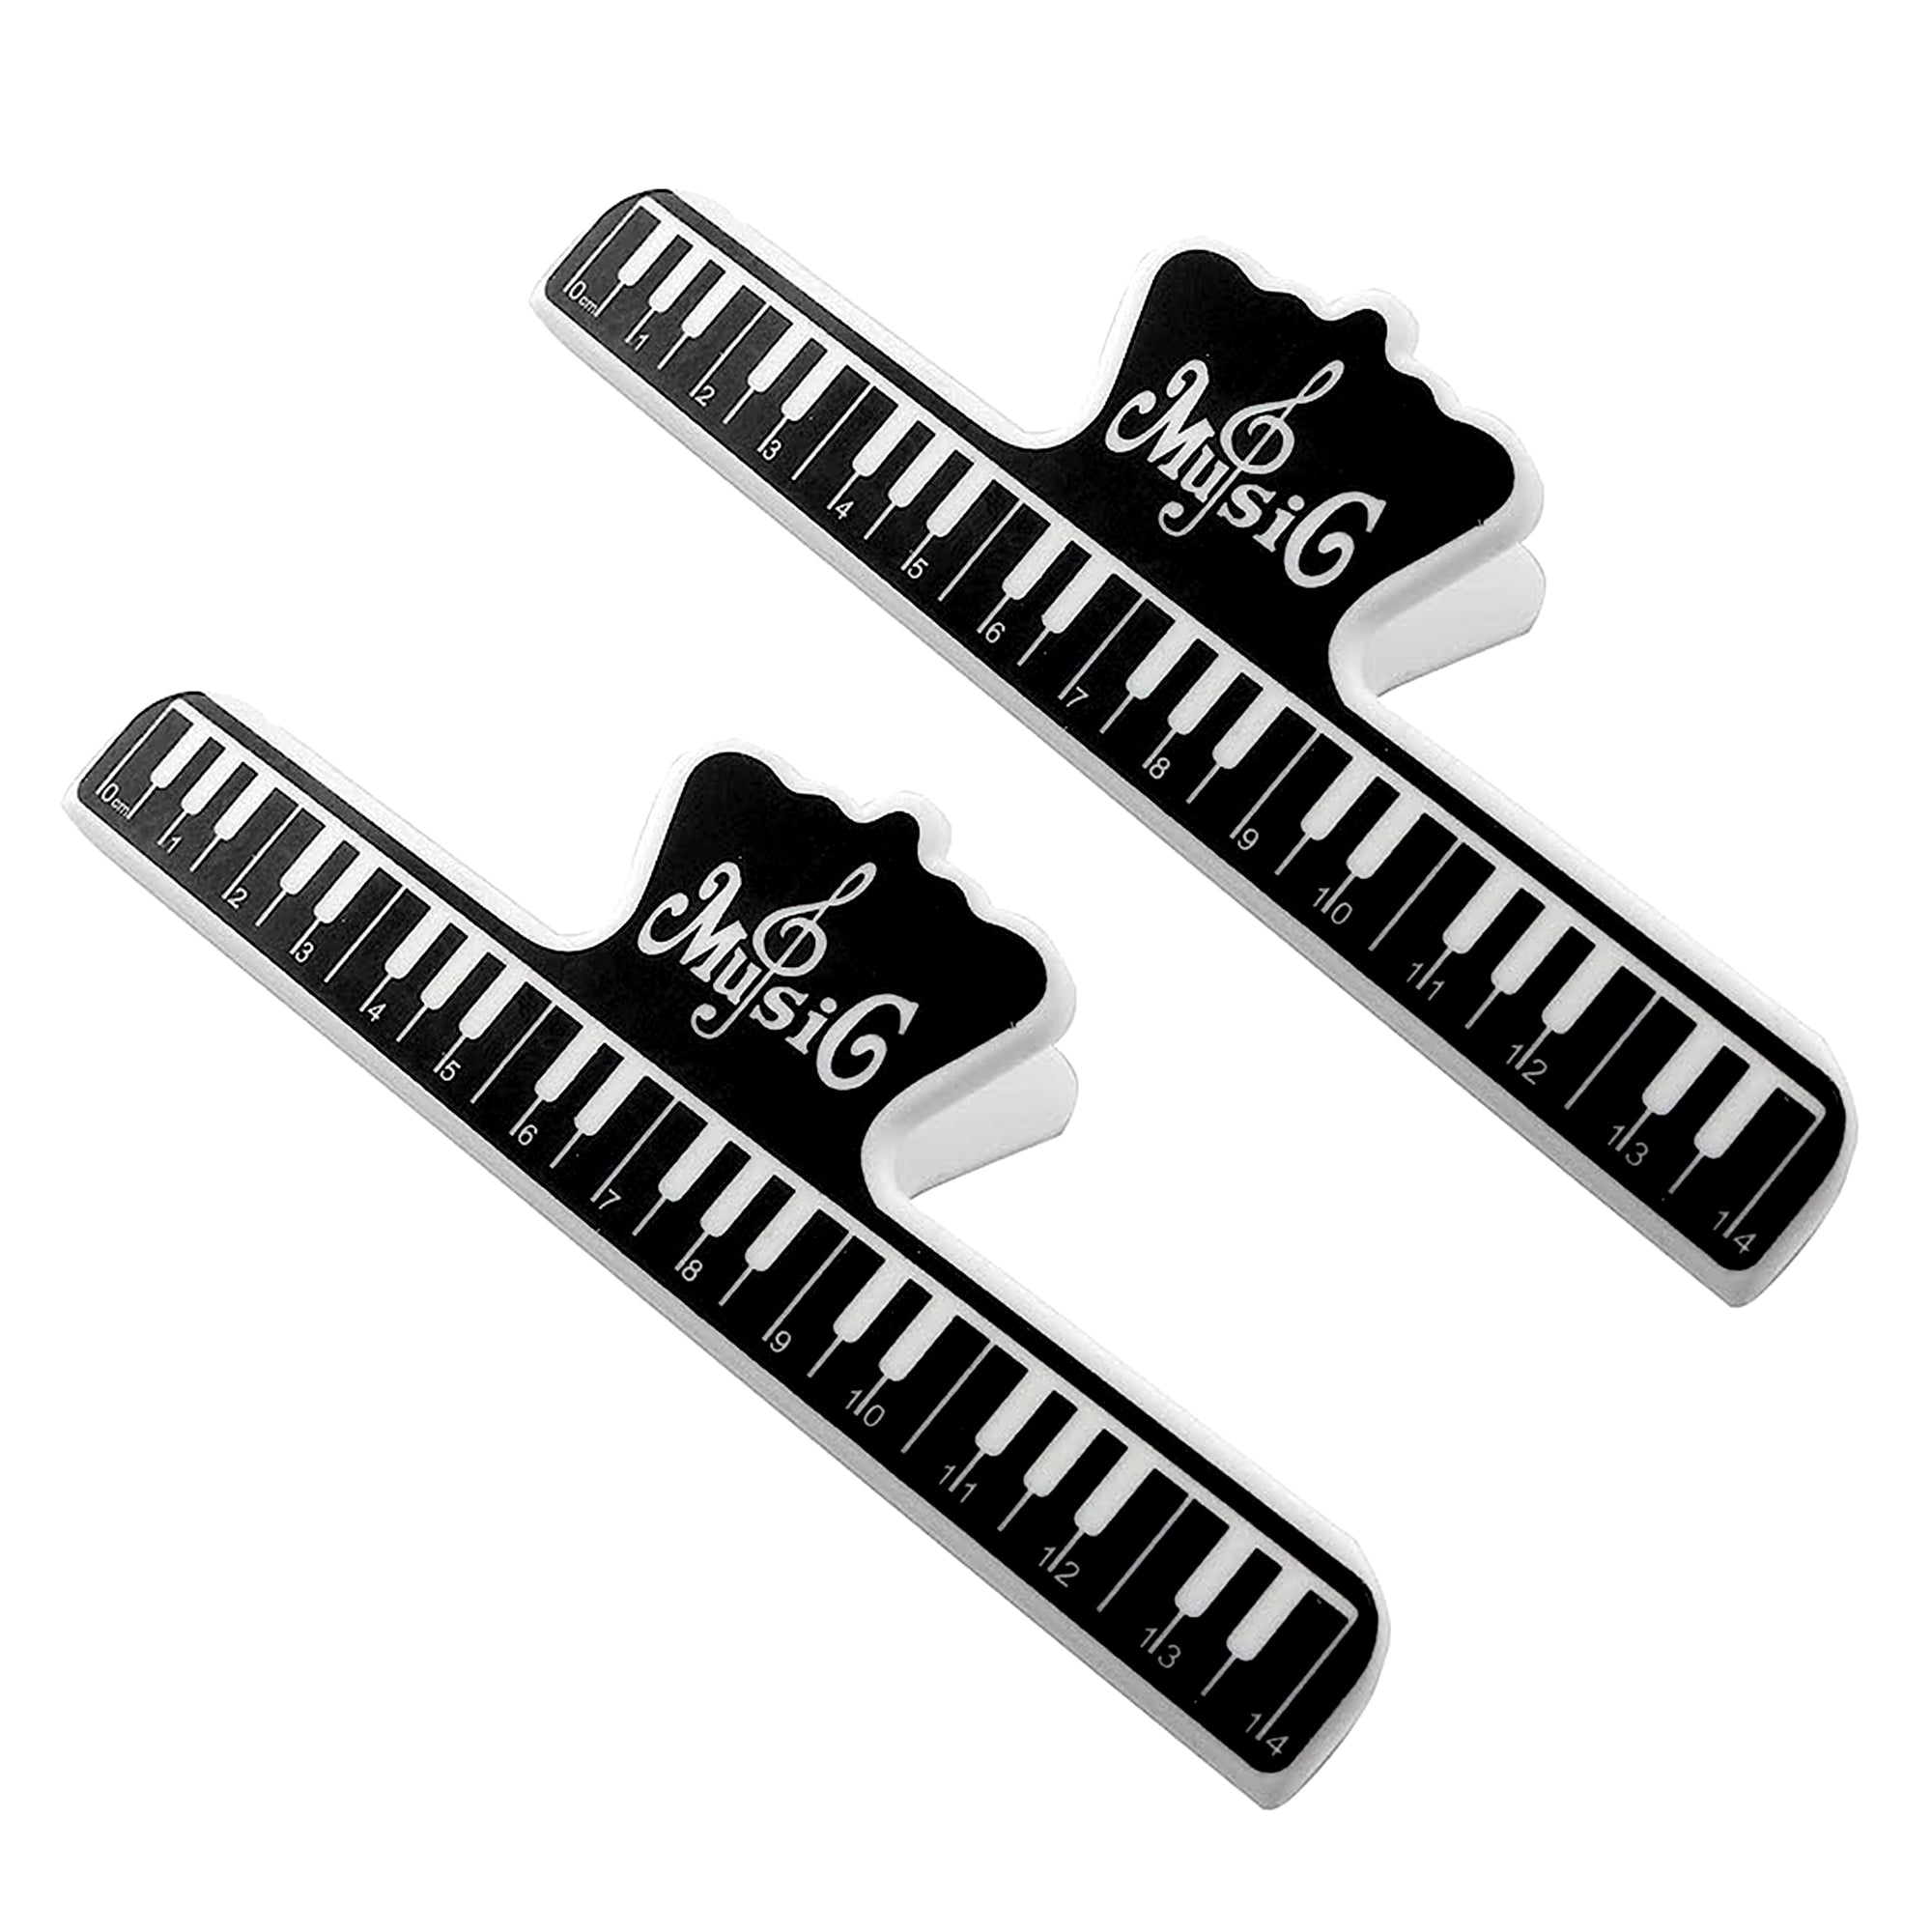 5 Core Music Page Holder 2PCS Black | Durable Plastic Music Score Fixed Clips| Music Sheet Paper Holder, Musical Note Clamps for Guitar Violin Piano Artists- MUS CLIP 2PCS